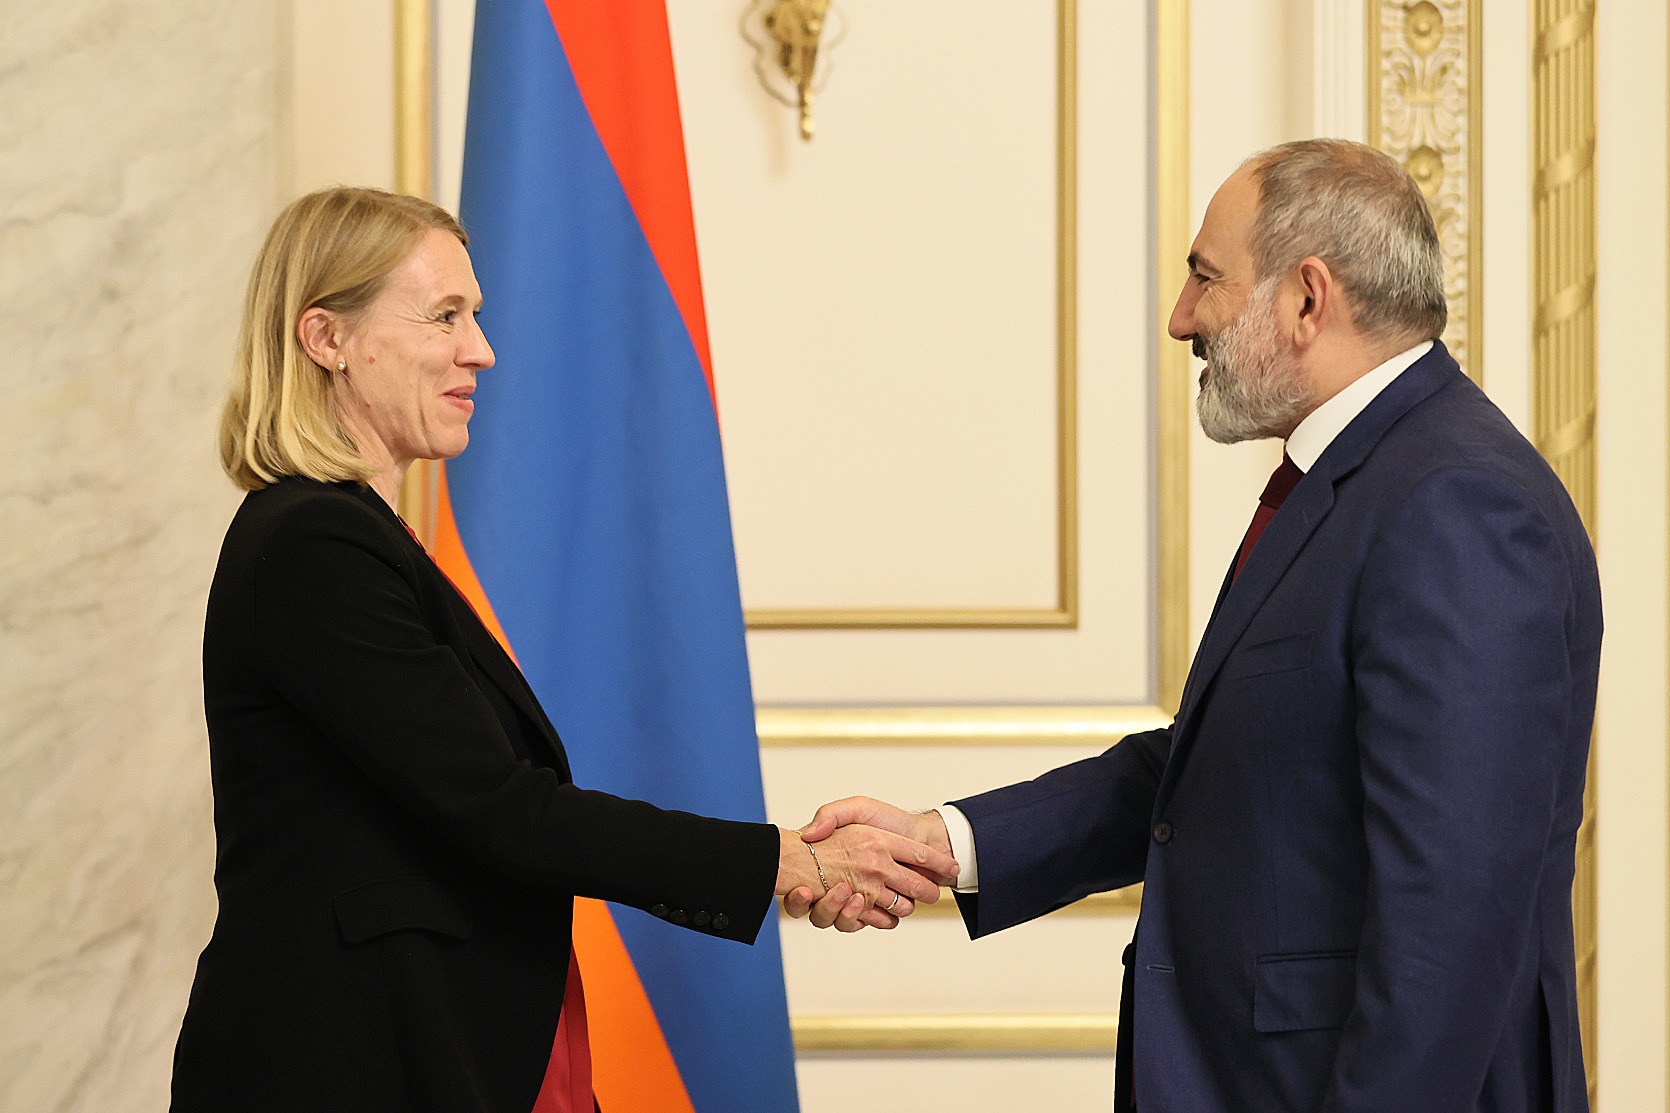 Prime Minister Pashinyan receives the Foreign Minister of Norway